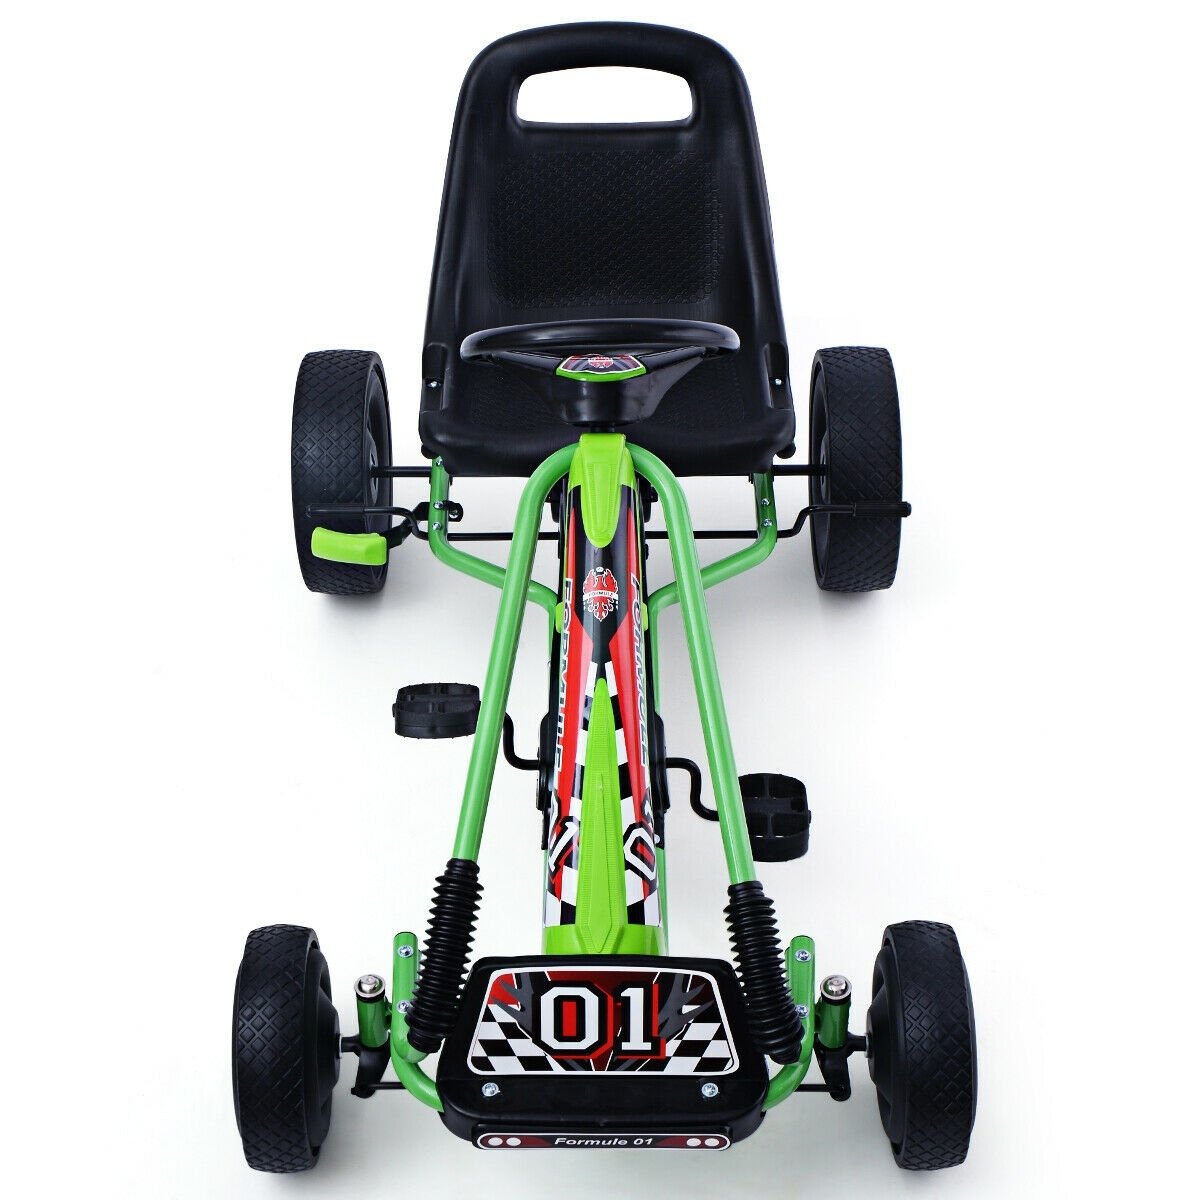 4 Wheels Kids Ride On Pedal Powered Bike Go Kart Racer Car Outdoor Play Toy, Green - Gallery Canada